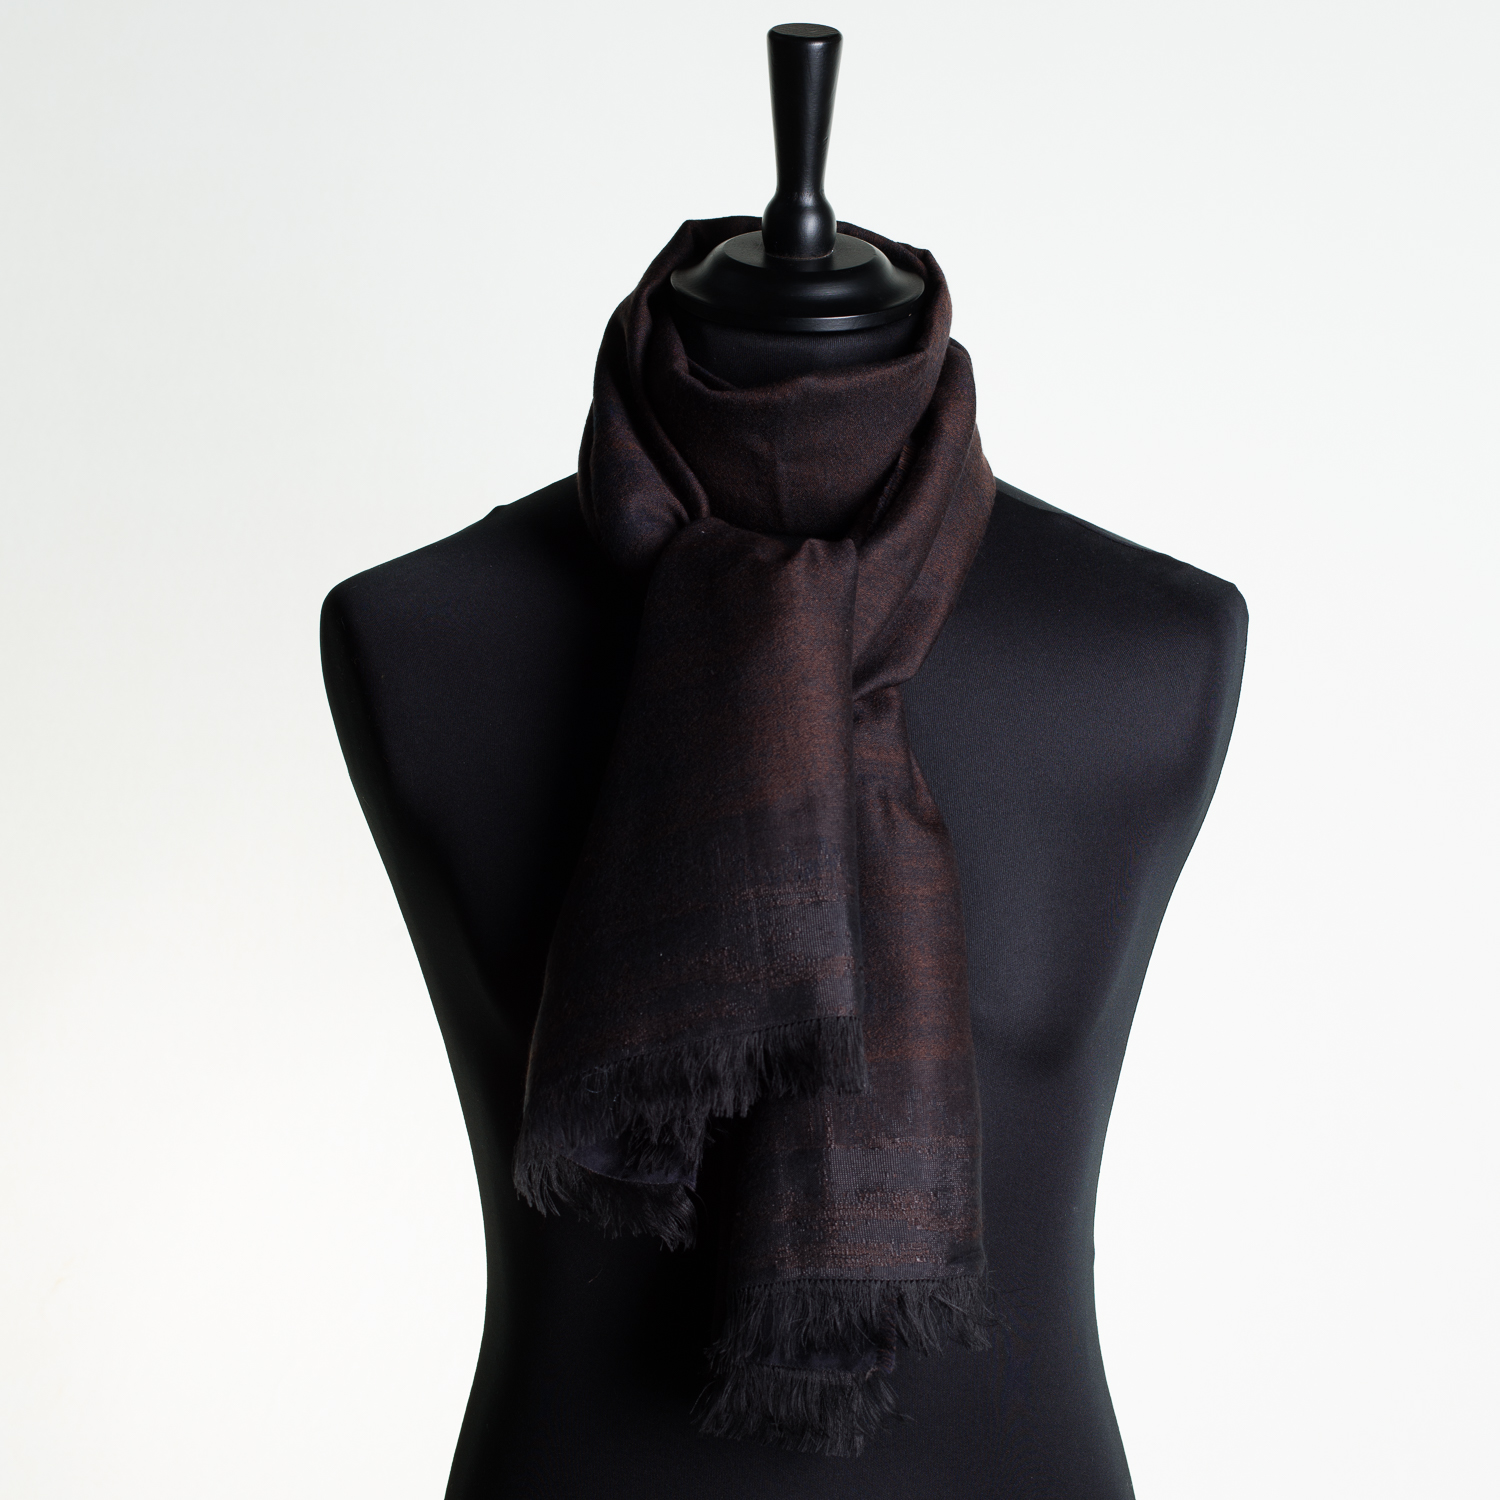 HOT CITY 'CONKER' LONG SILK AND CASHMERE SCARF